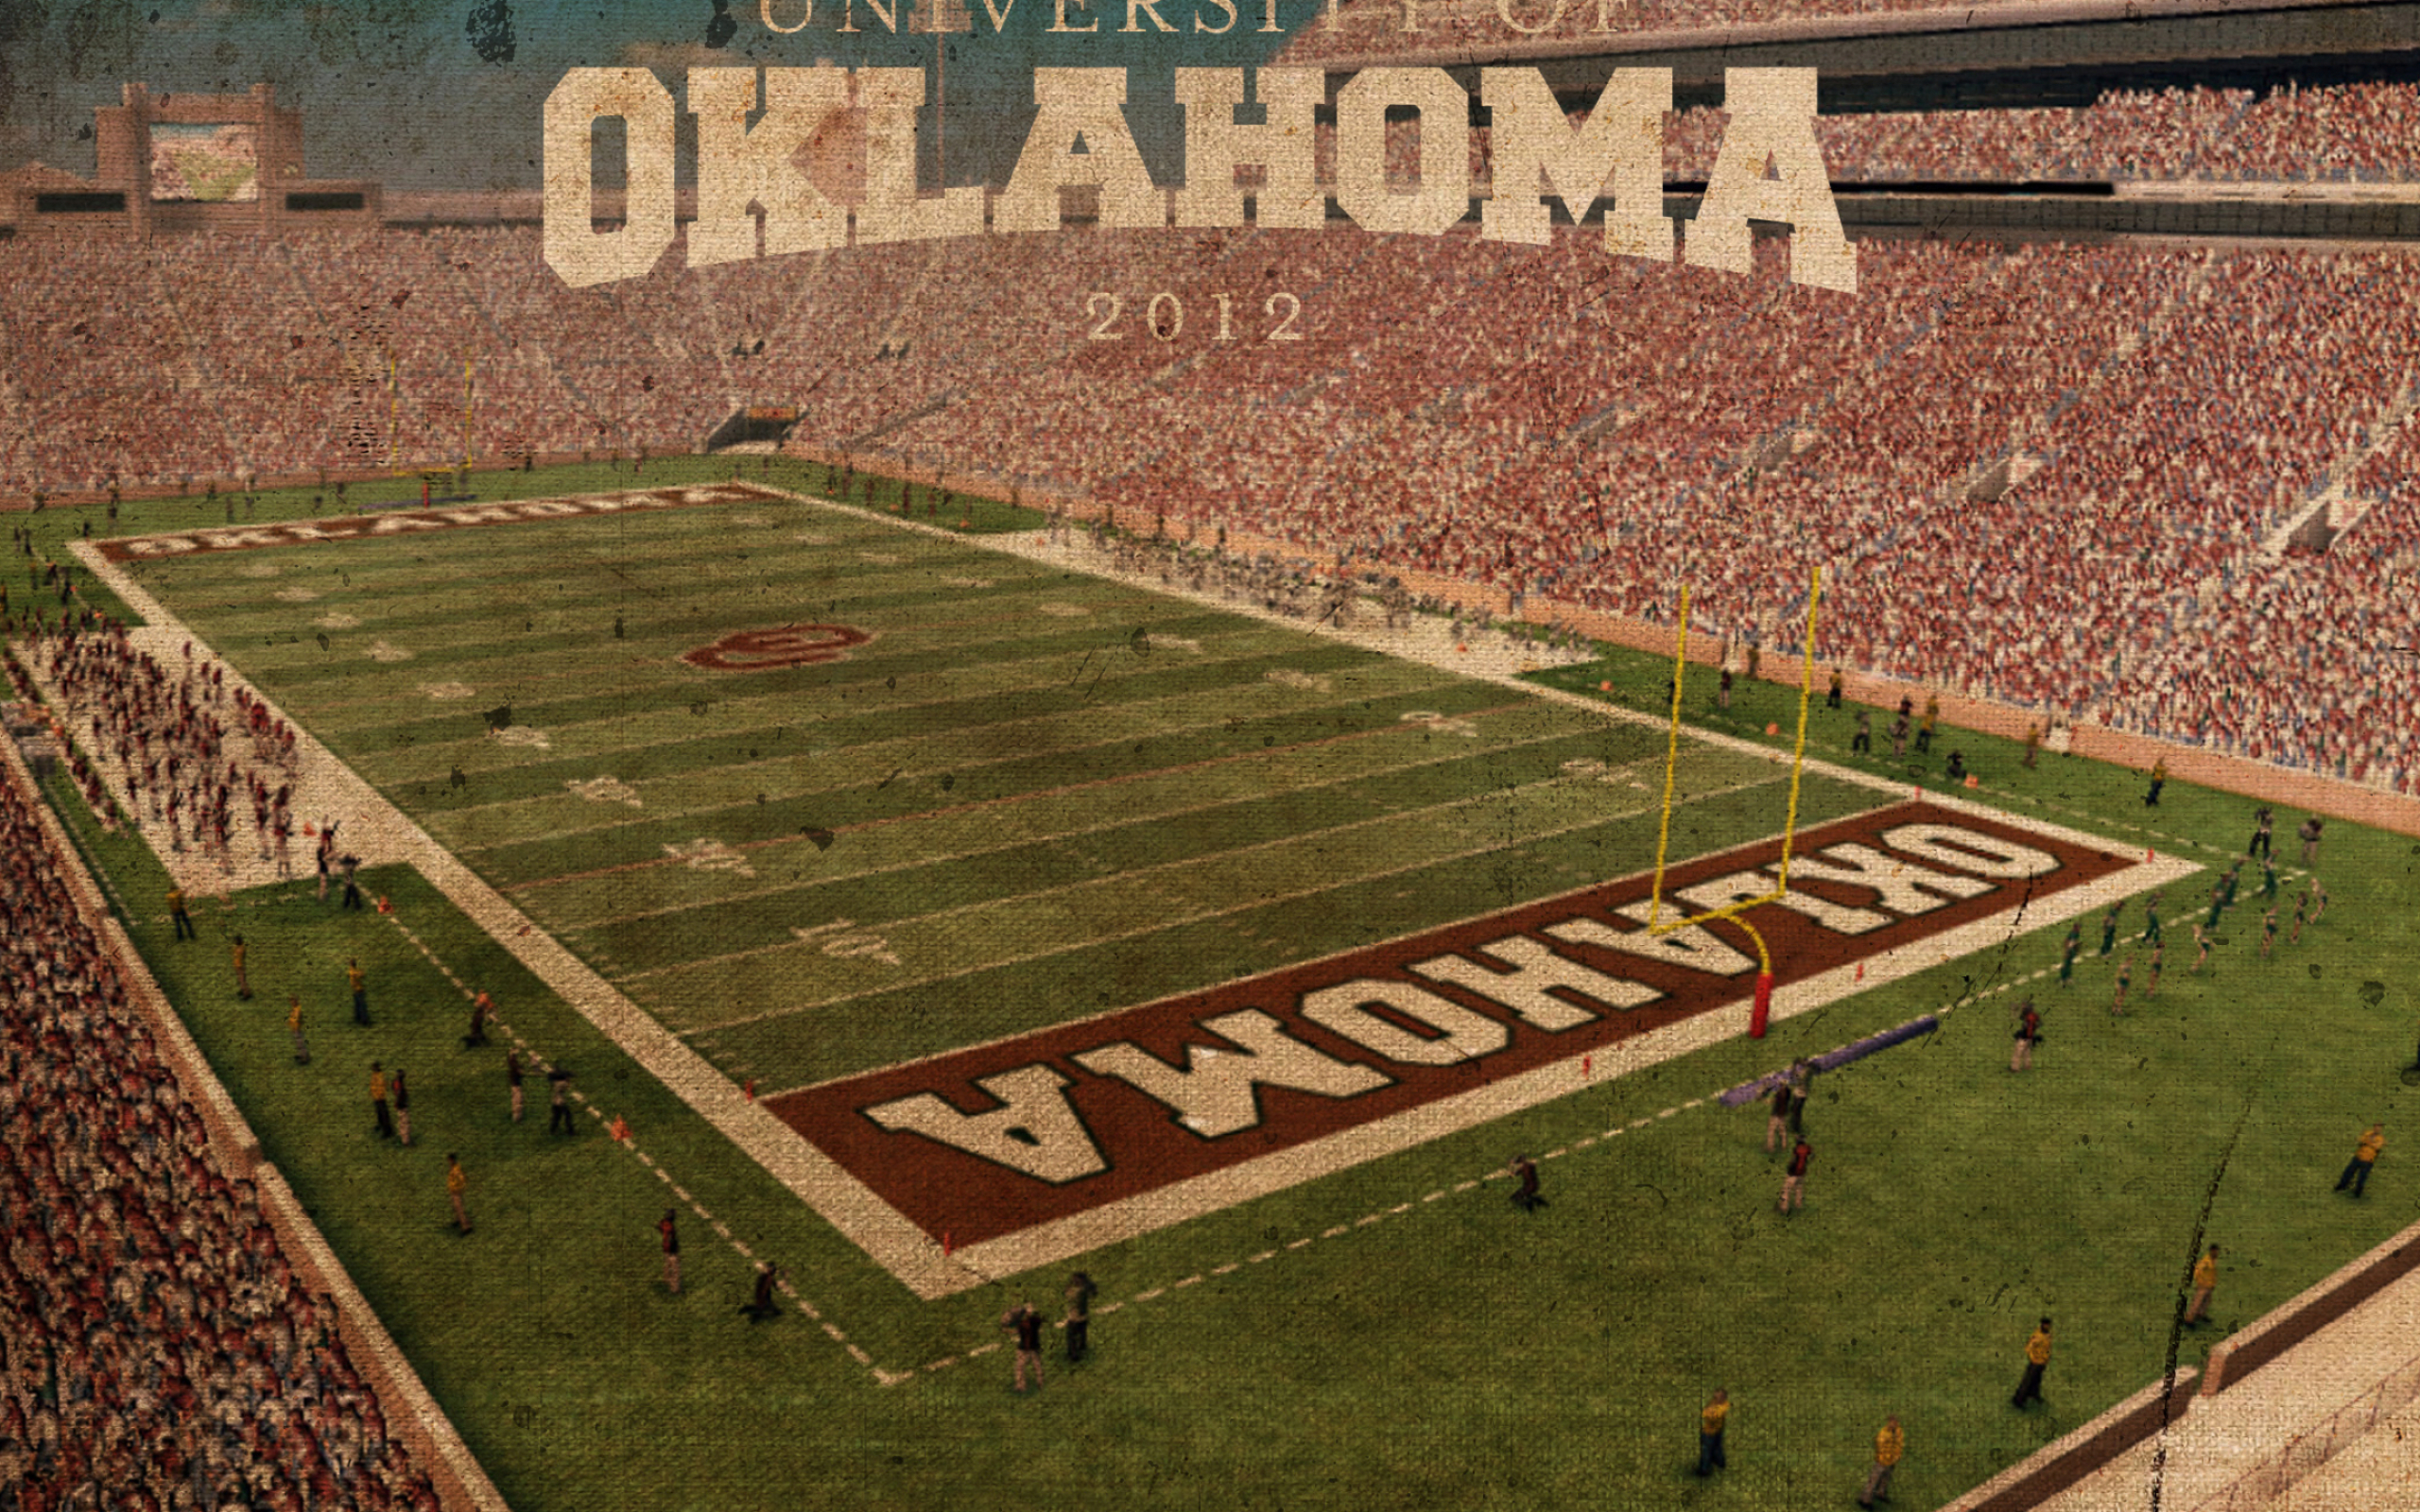 2560x1600 Oklahoma Sooners Chrome Wallpapers, Browser Themes and More Brand Thunder